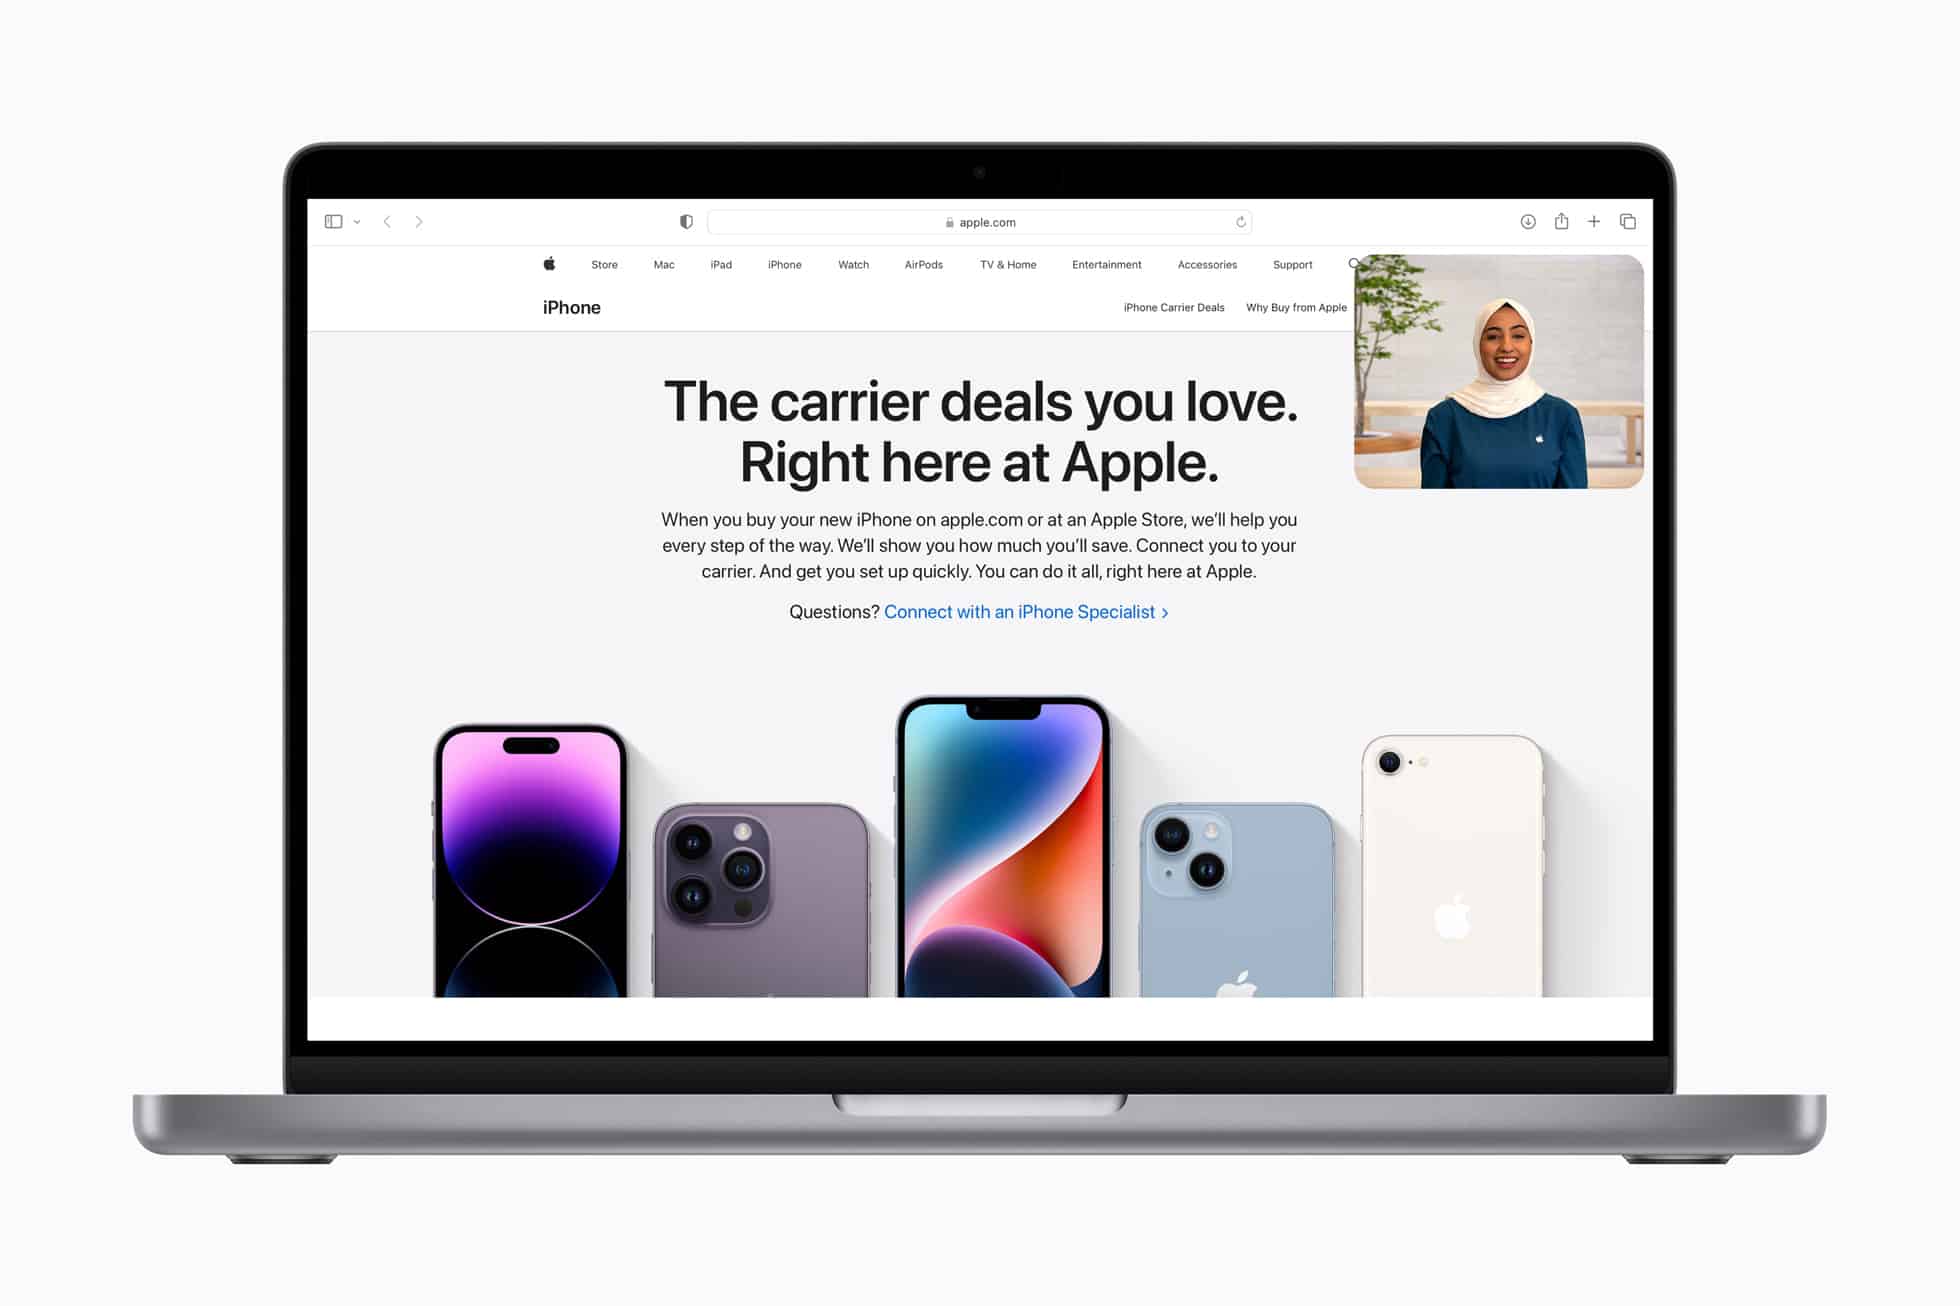 Apple Video Specialist Will Now Help You Purchase an iPhone in the US